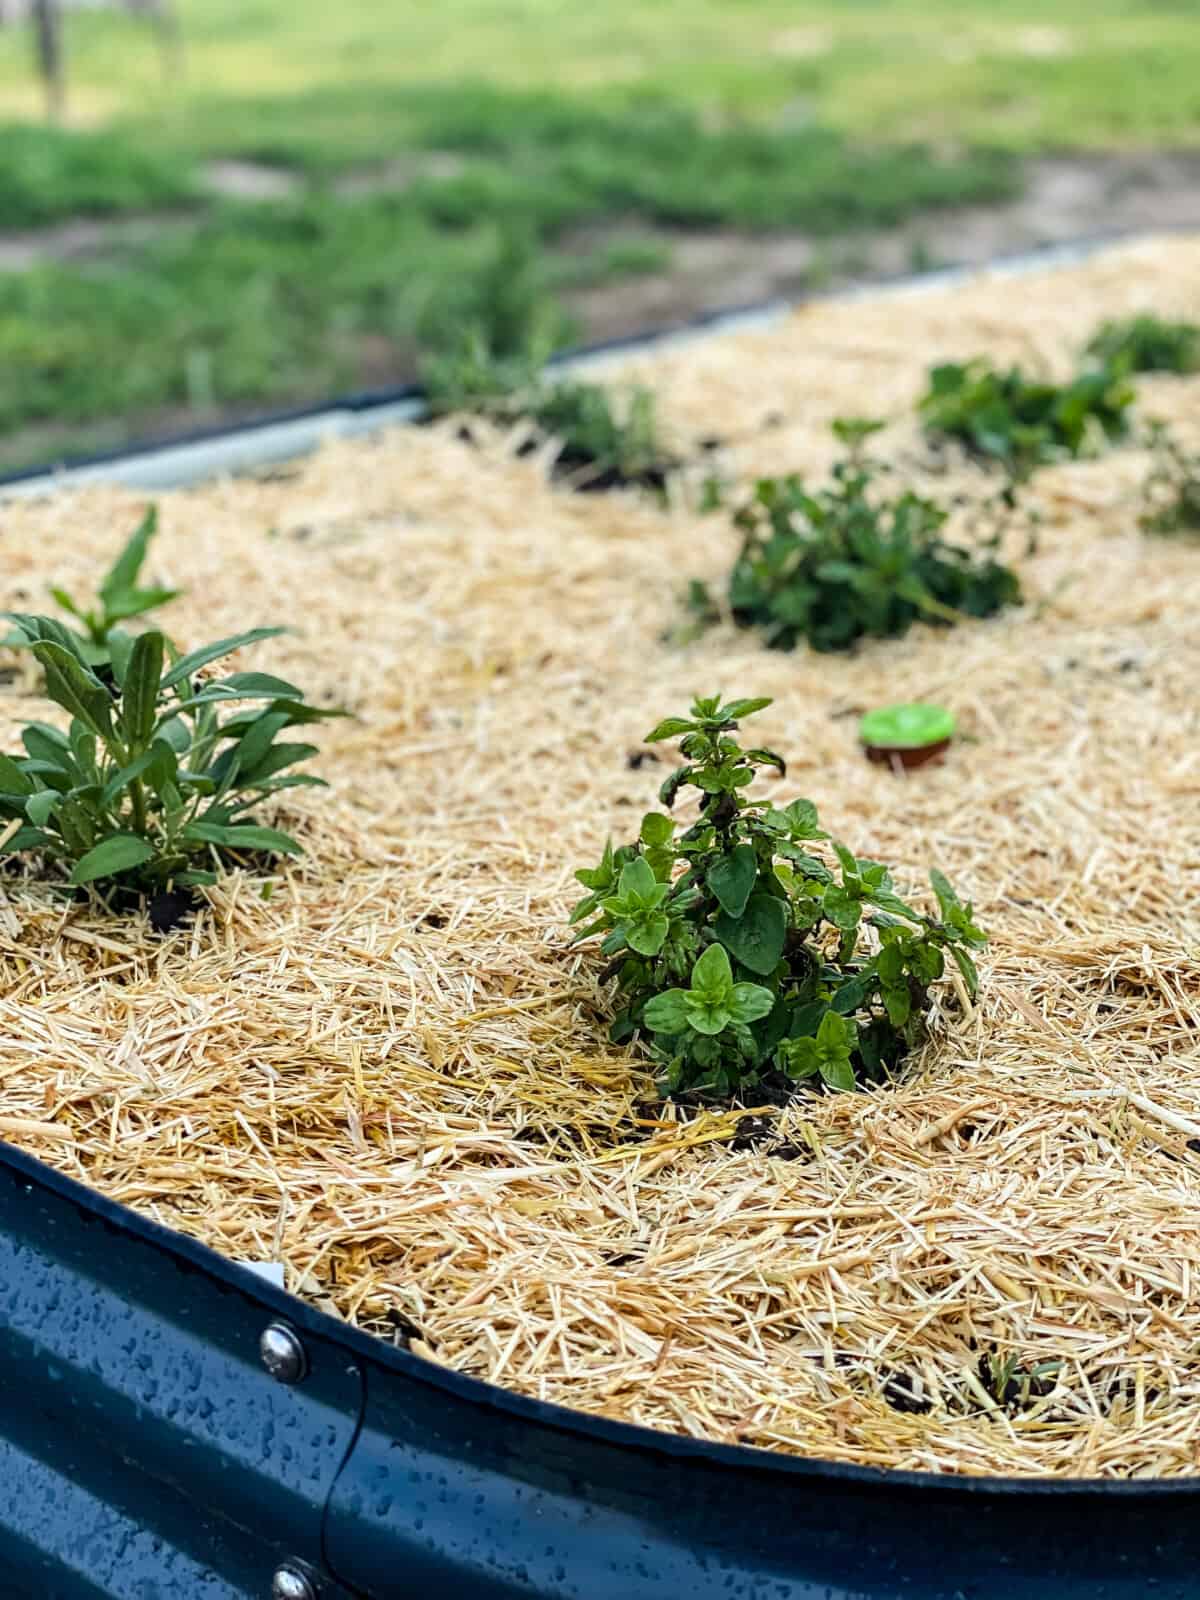 culinary herbs in a raised garden bed topped with garden straw mulch.